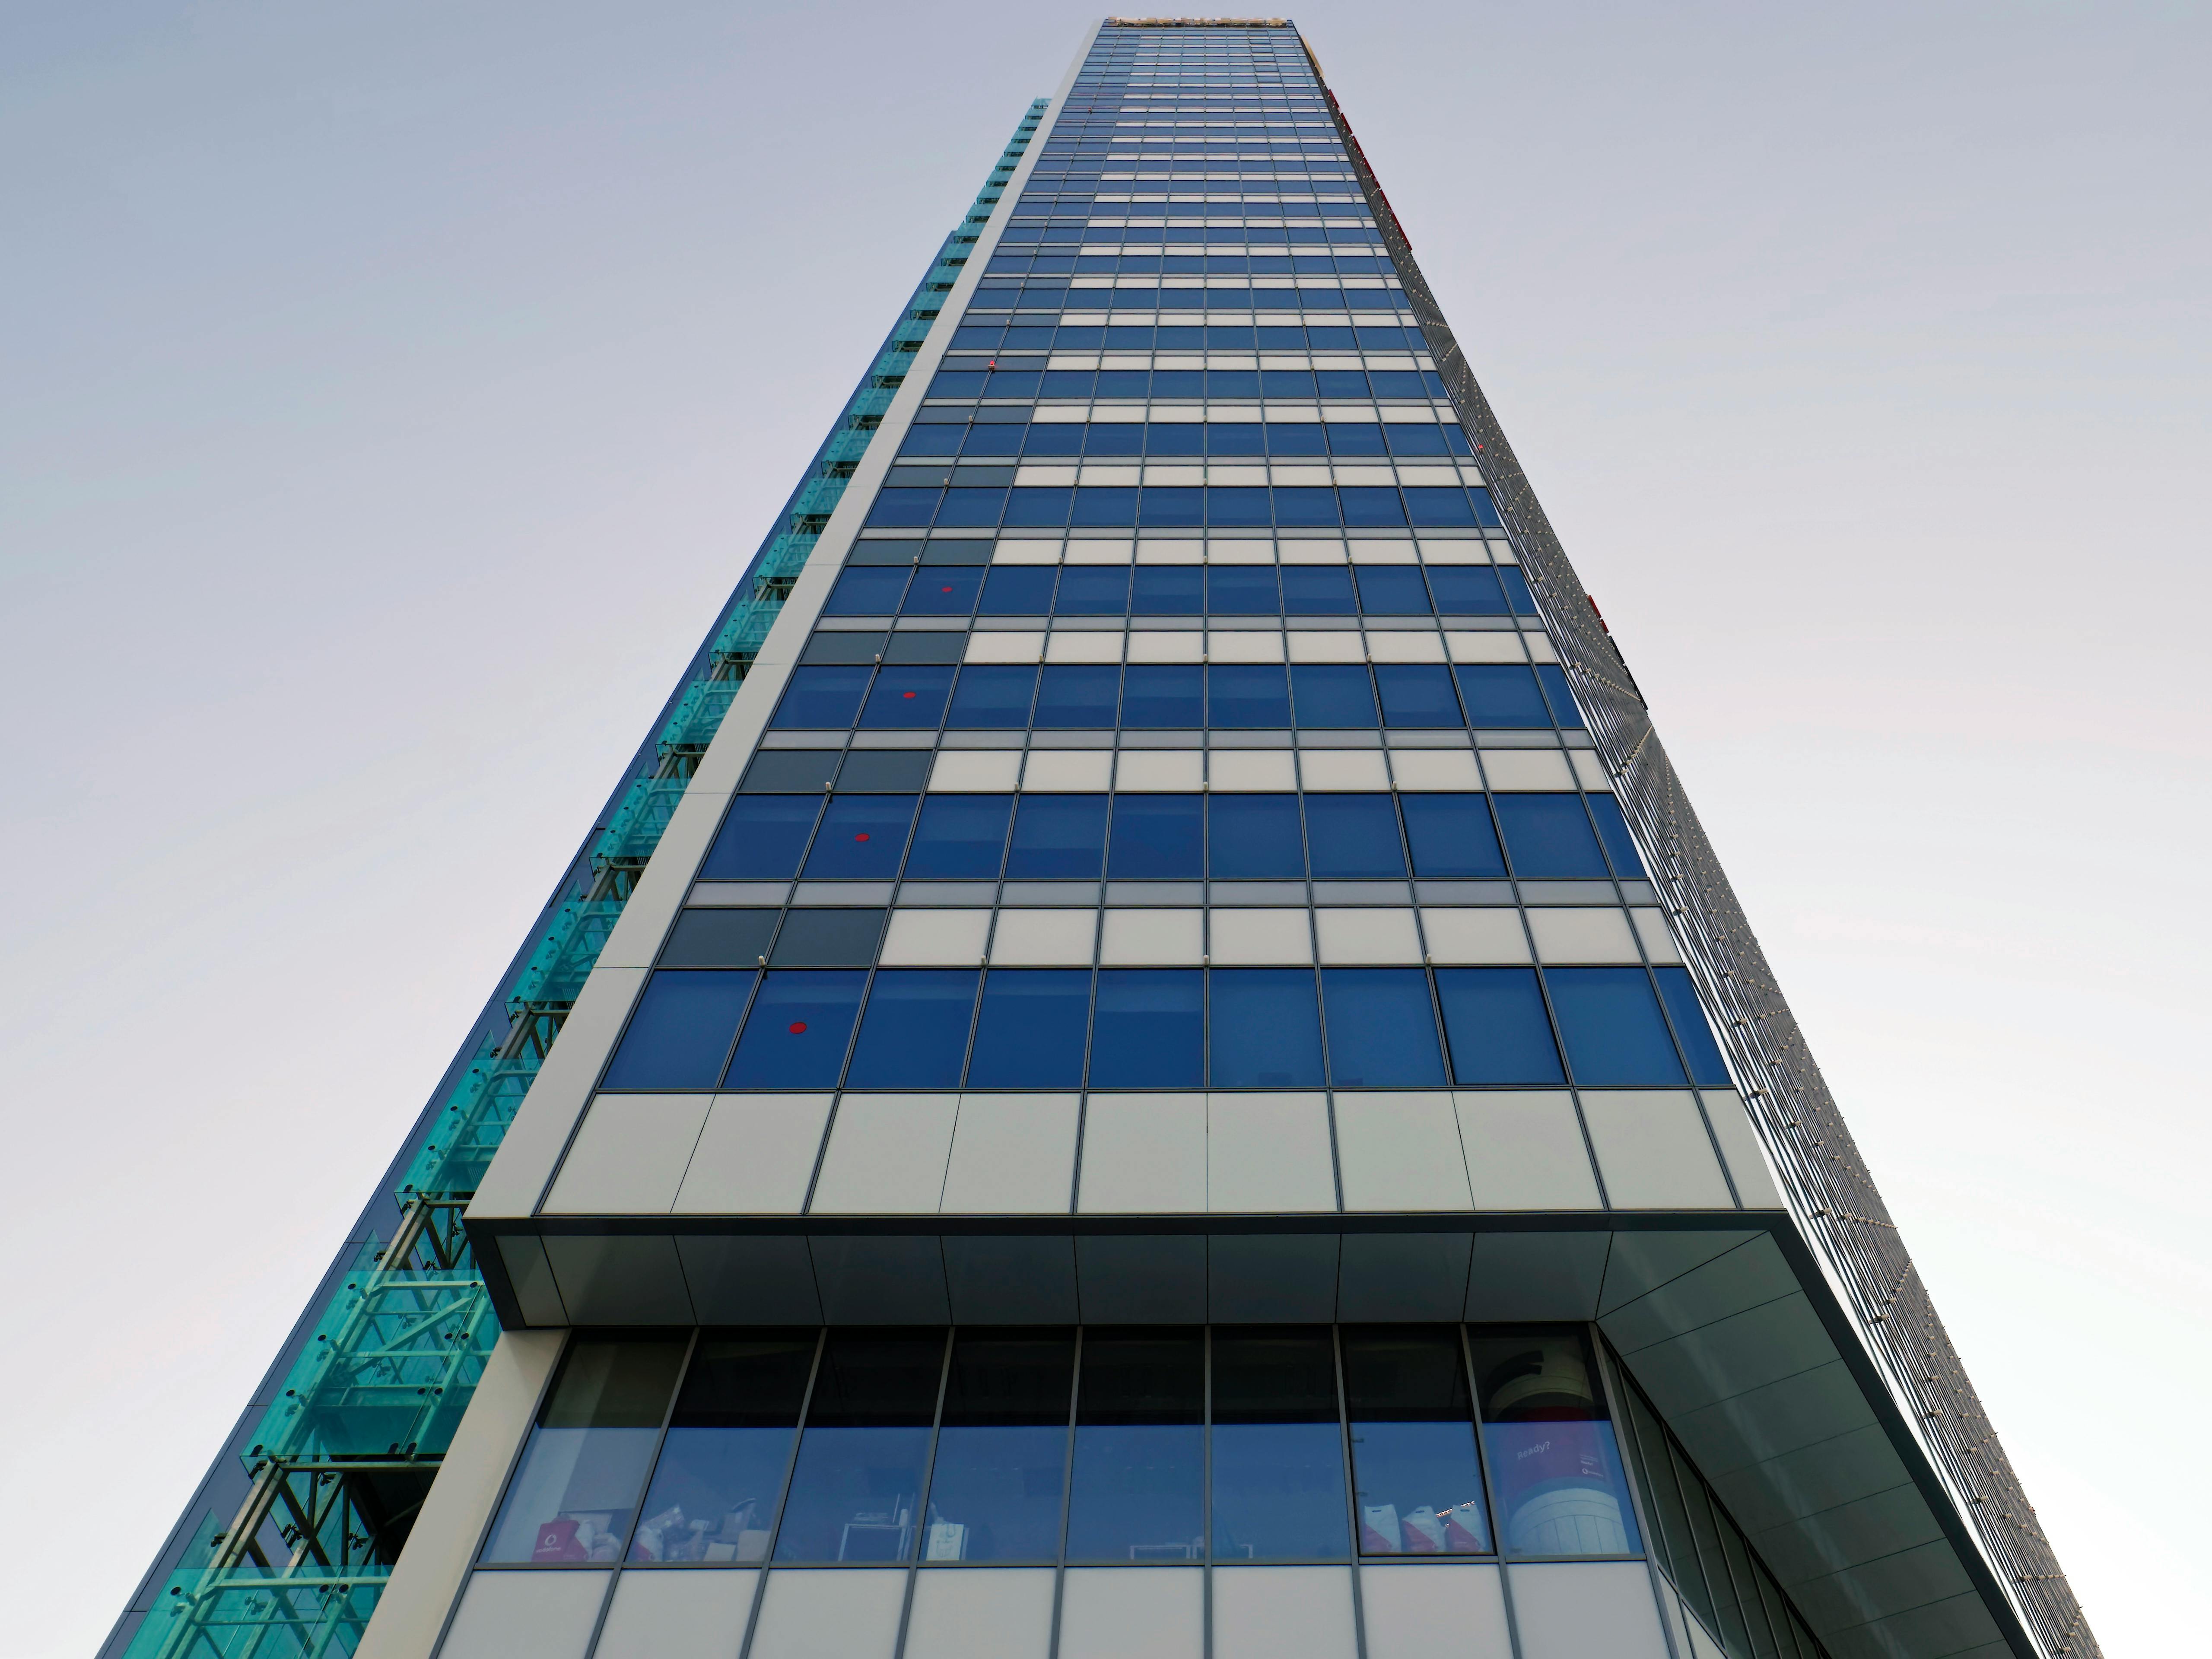 Free stock photo of architecture, high rise building, low angle shot